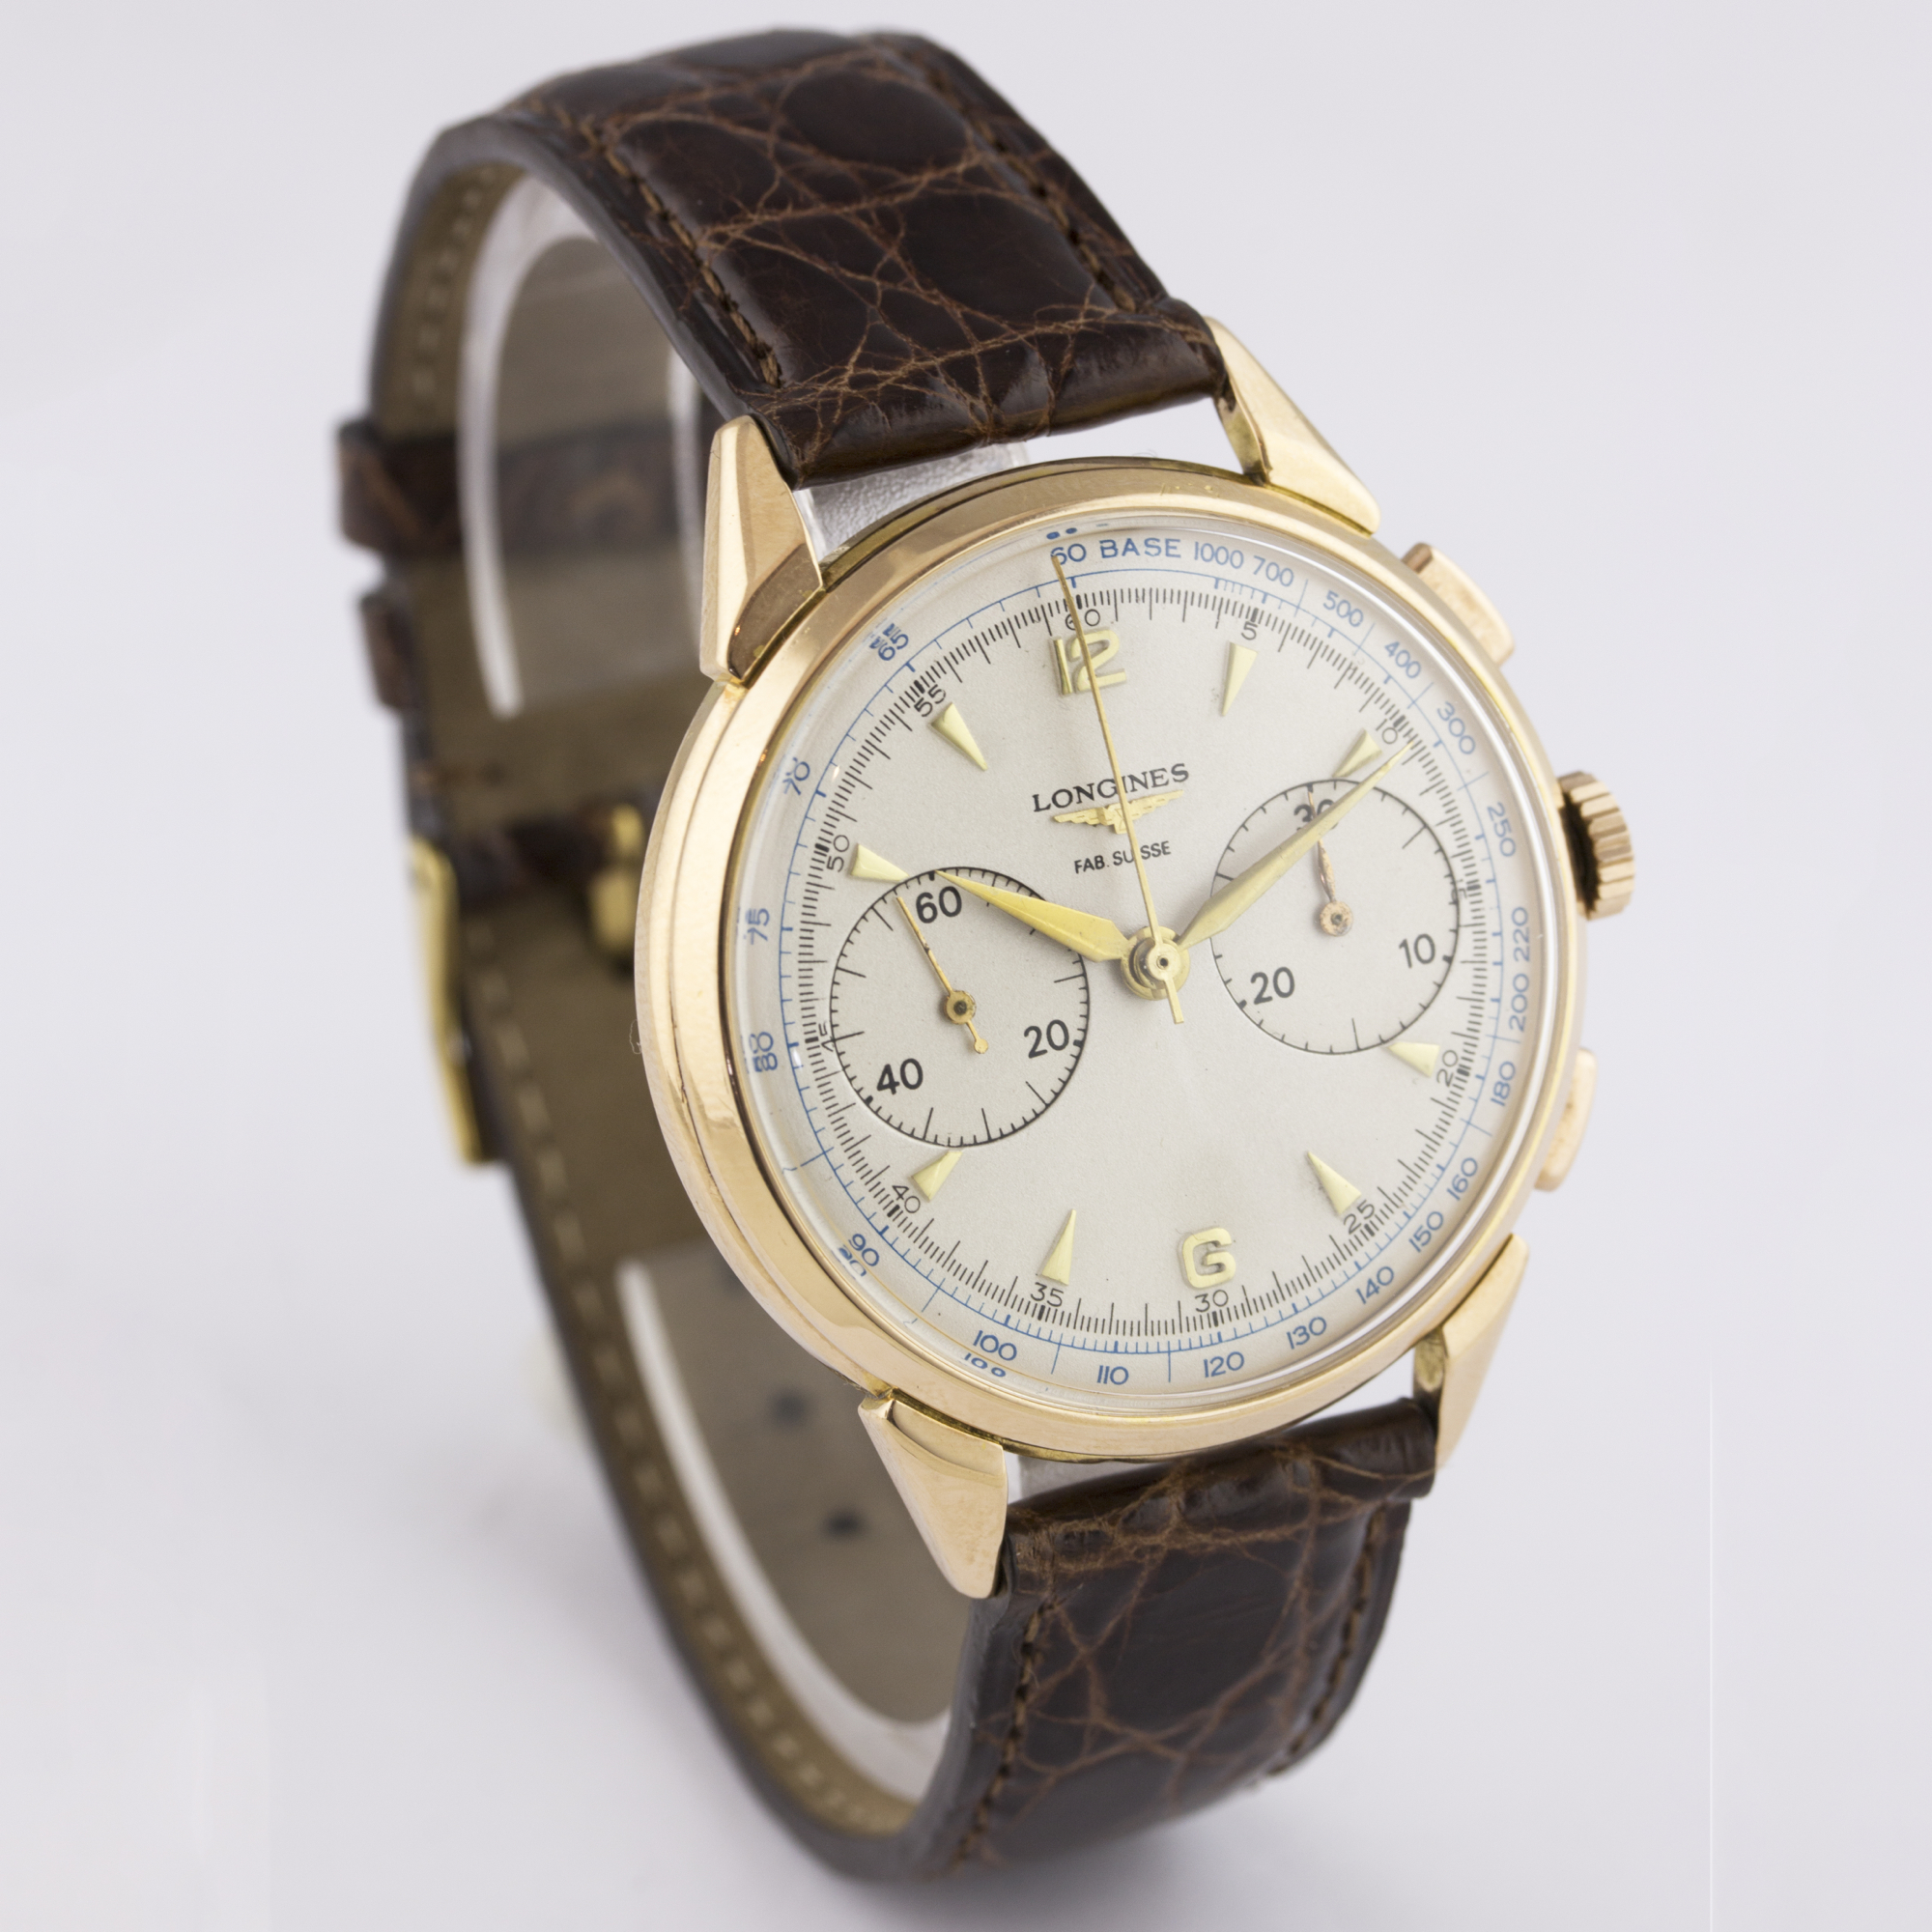 A GENTLEMAN'S 18K SOLID ROSE GOLD LONGINES FLYBACK CHRONOGRAPH WRIST WATCH CIRCA 1950, WITH A COPY - Image 5 of 8